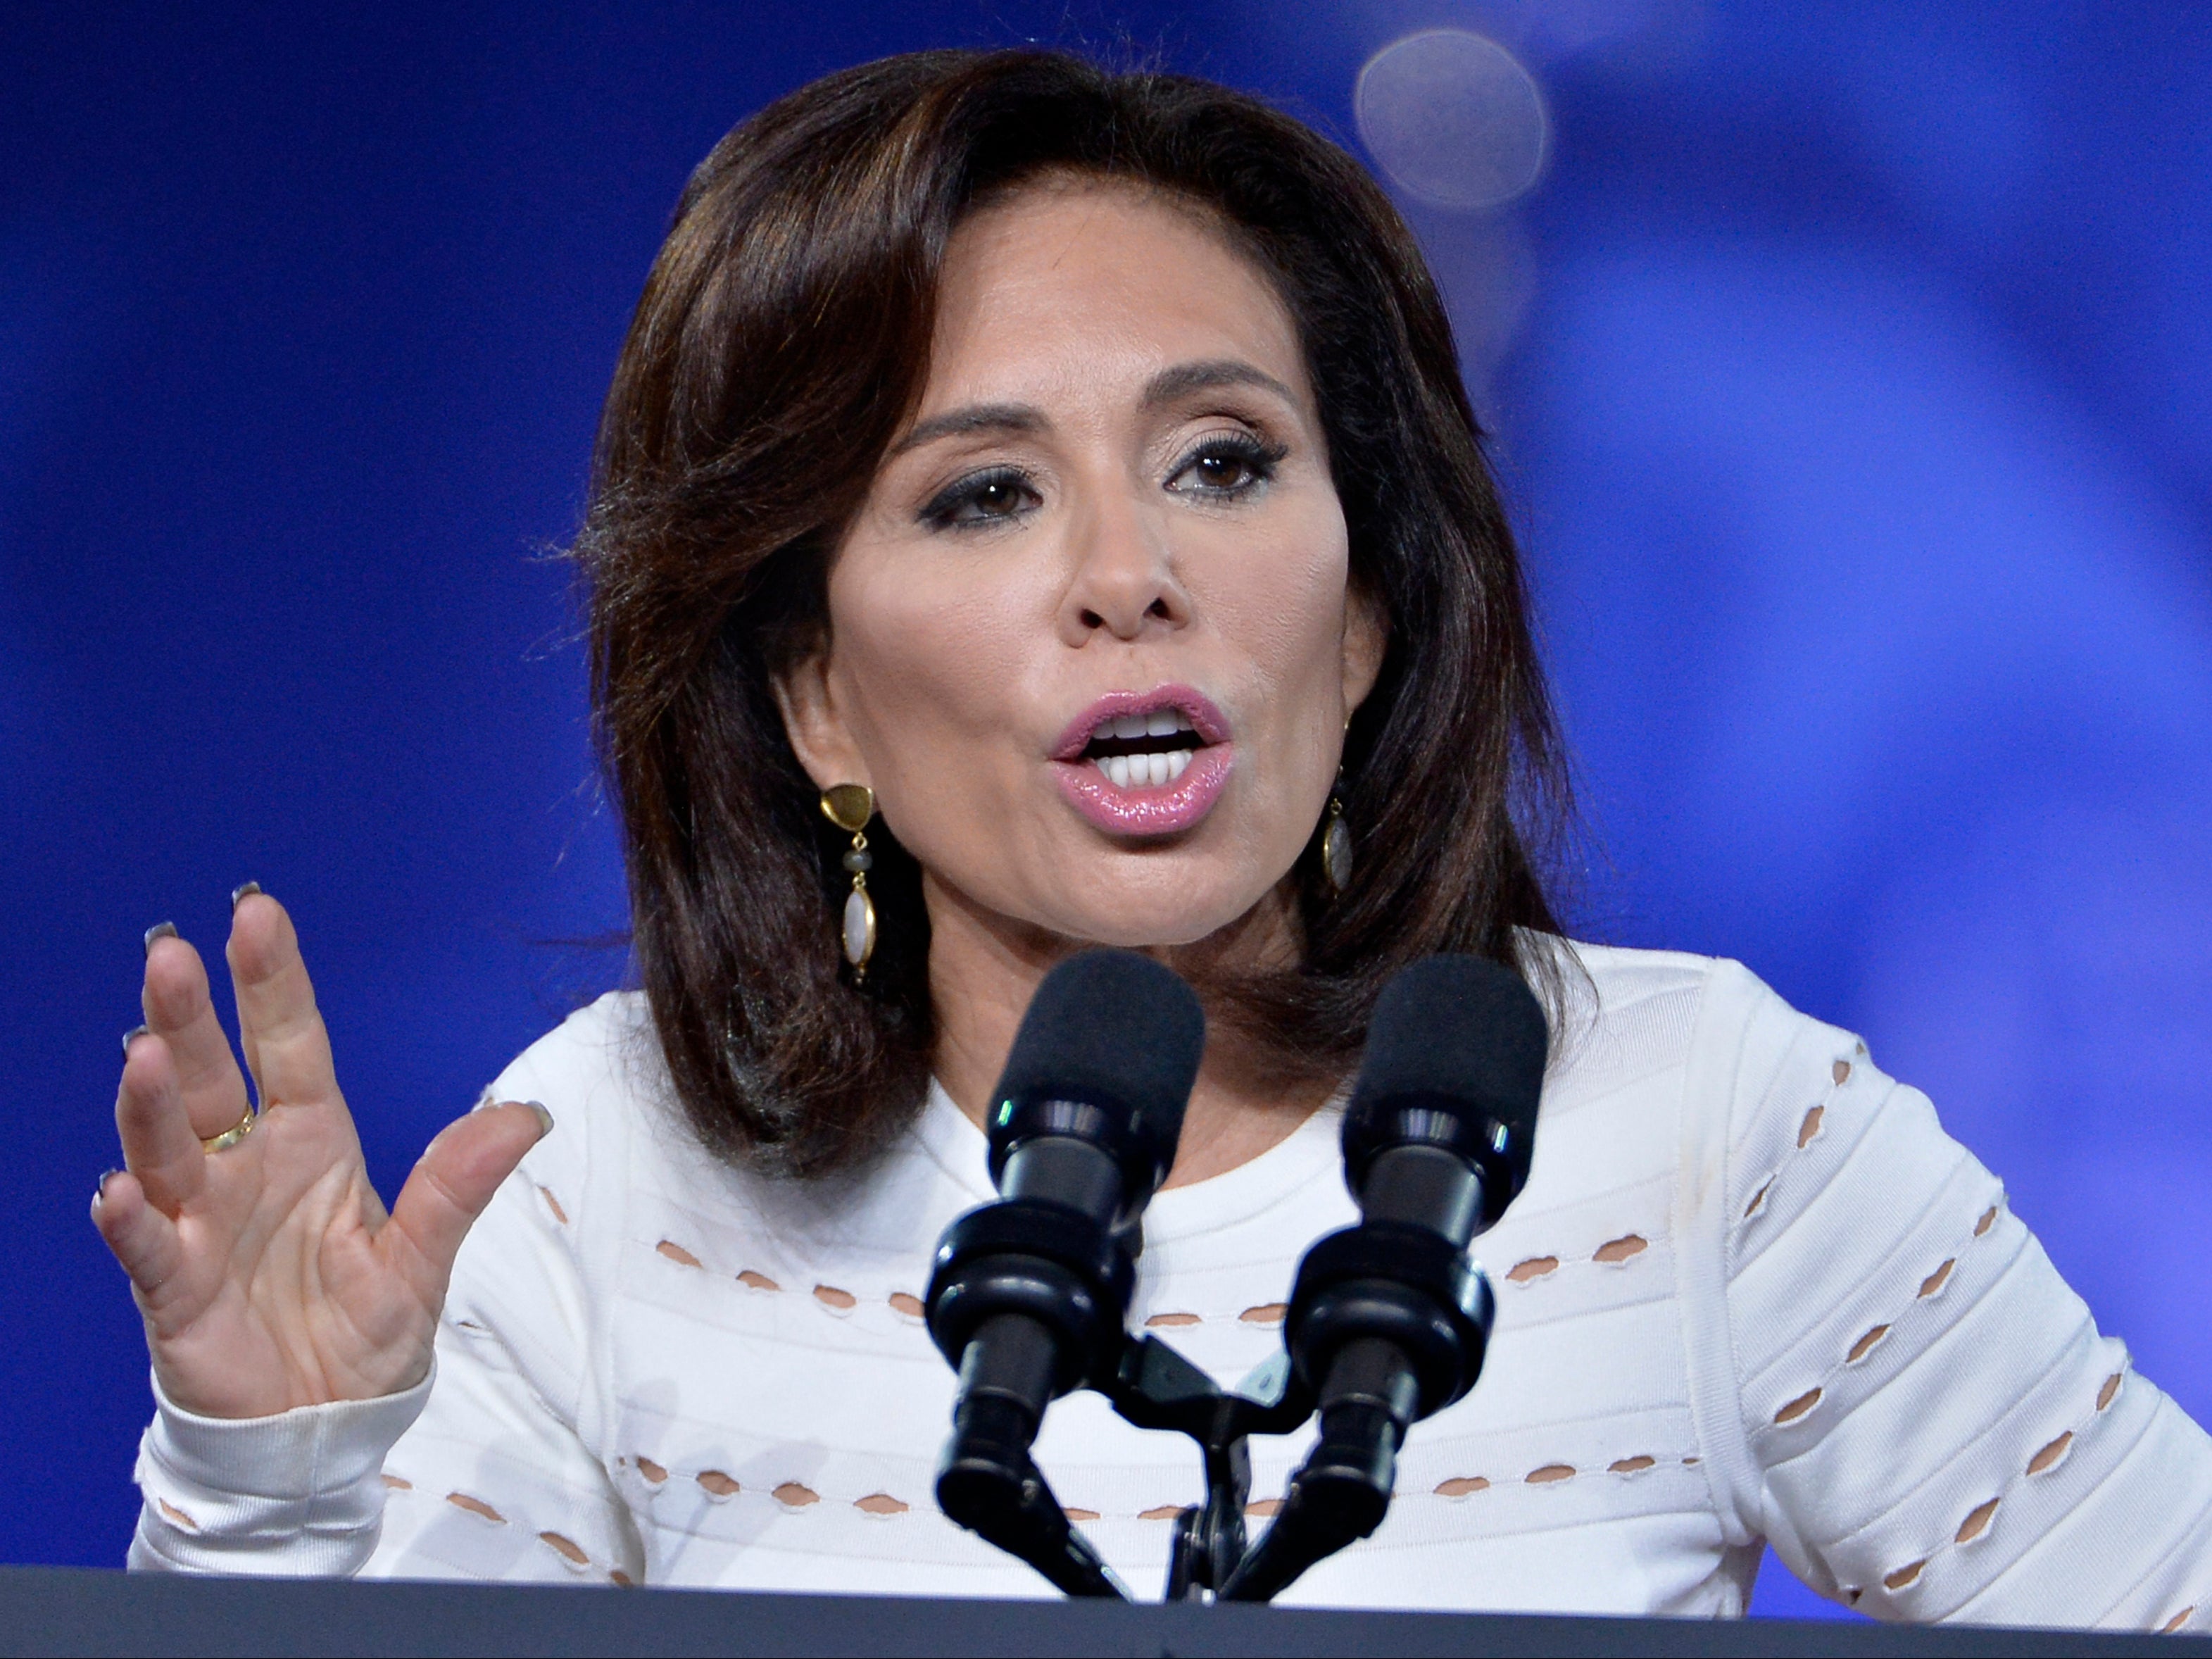 Judge Jeanine Pirro of FOX News Network makes remarks to the Conservative Political Action Conference in 2017